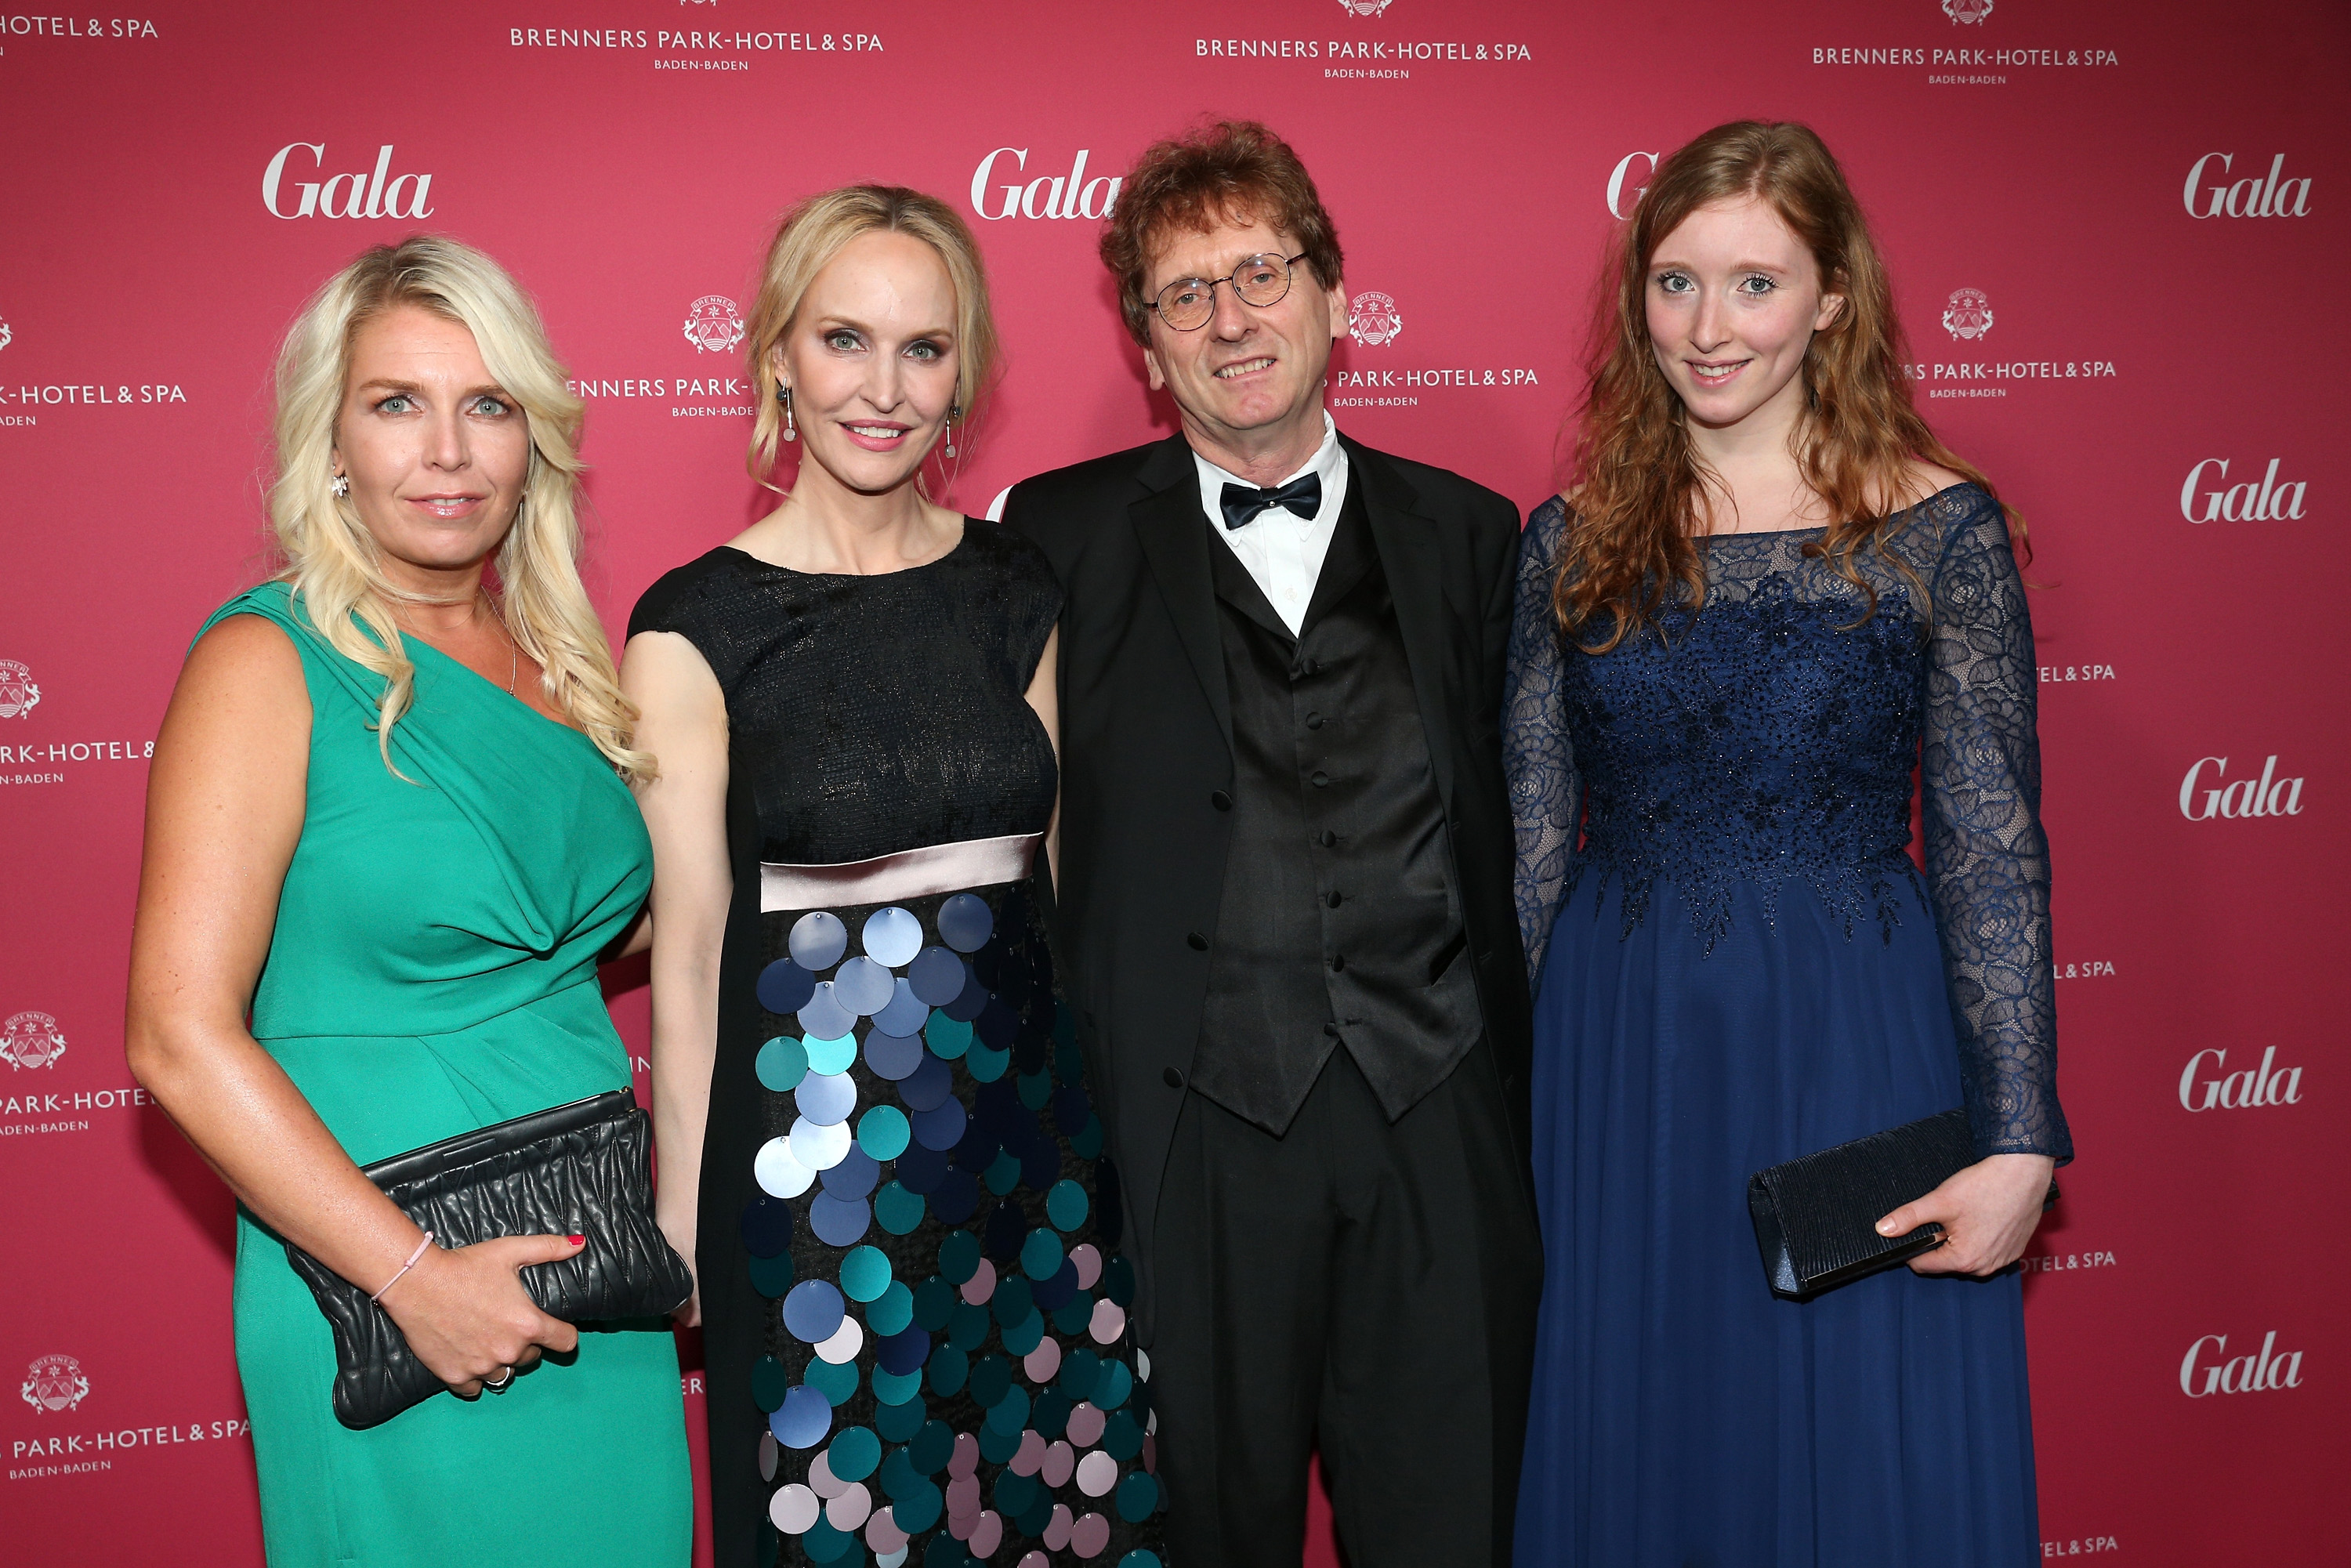 BADEN-BADEN, BADEN-WUERTTEMBERG - APRIL 02: Astrid Bleeker, Anne Meyer-Minneman, Editor in chief of GALA, Michael Braungart and his daughter during the Gala Spa Awards on April 2, 2016 in Baden-Baden, Germany. (Photo by Gisela Schober/Getty Images for GALA)